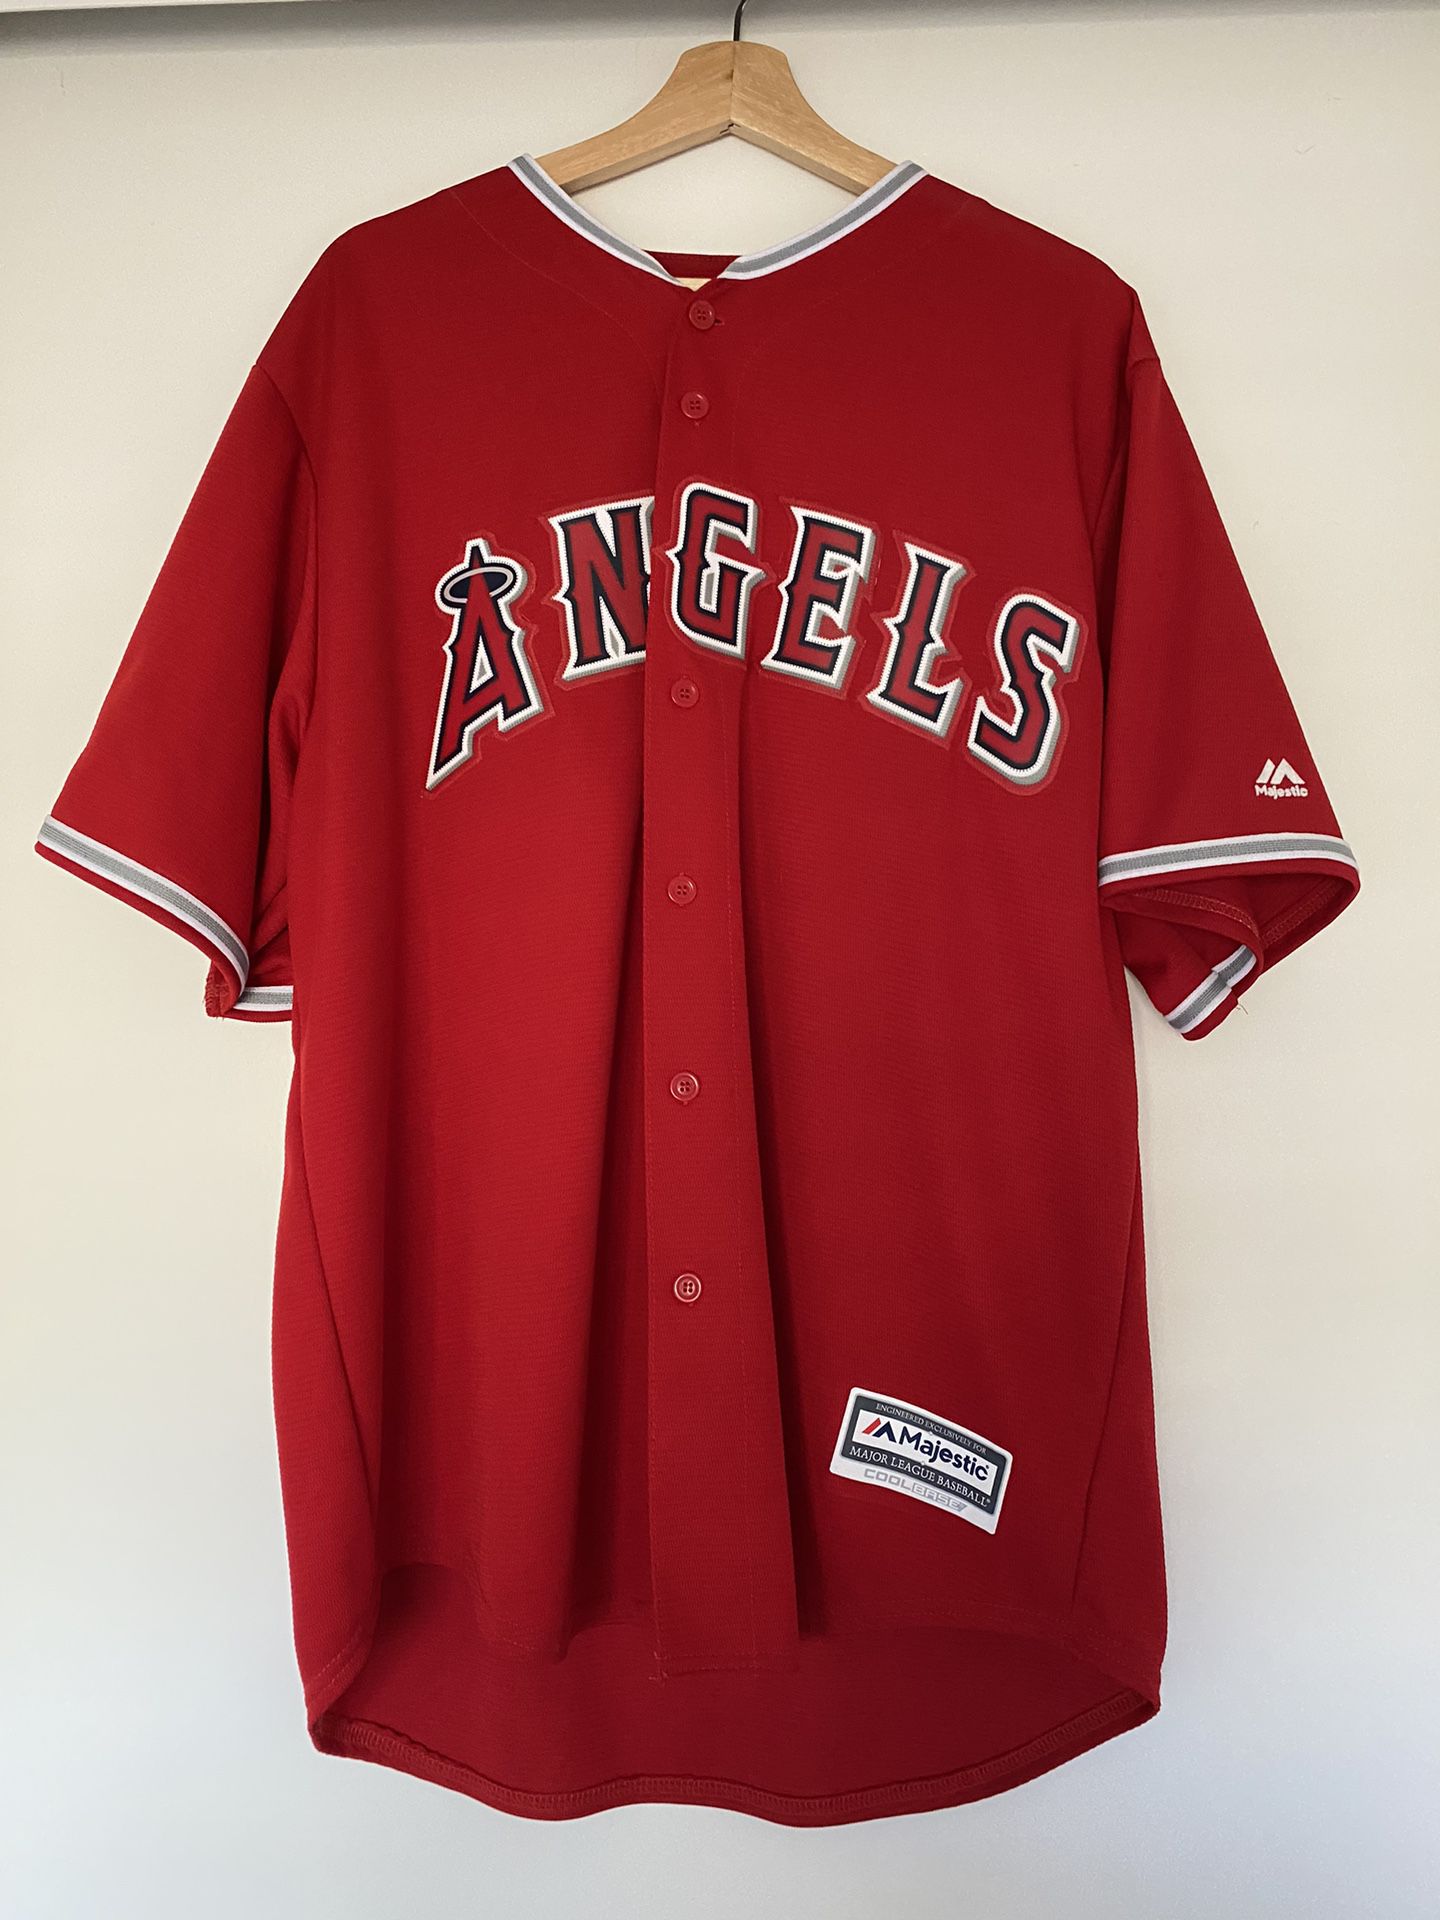 Mens XL Angles Mike Trout Jersey for Sale in Corona, CA - OfferUp